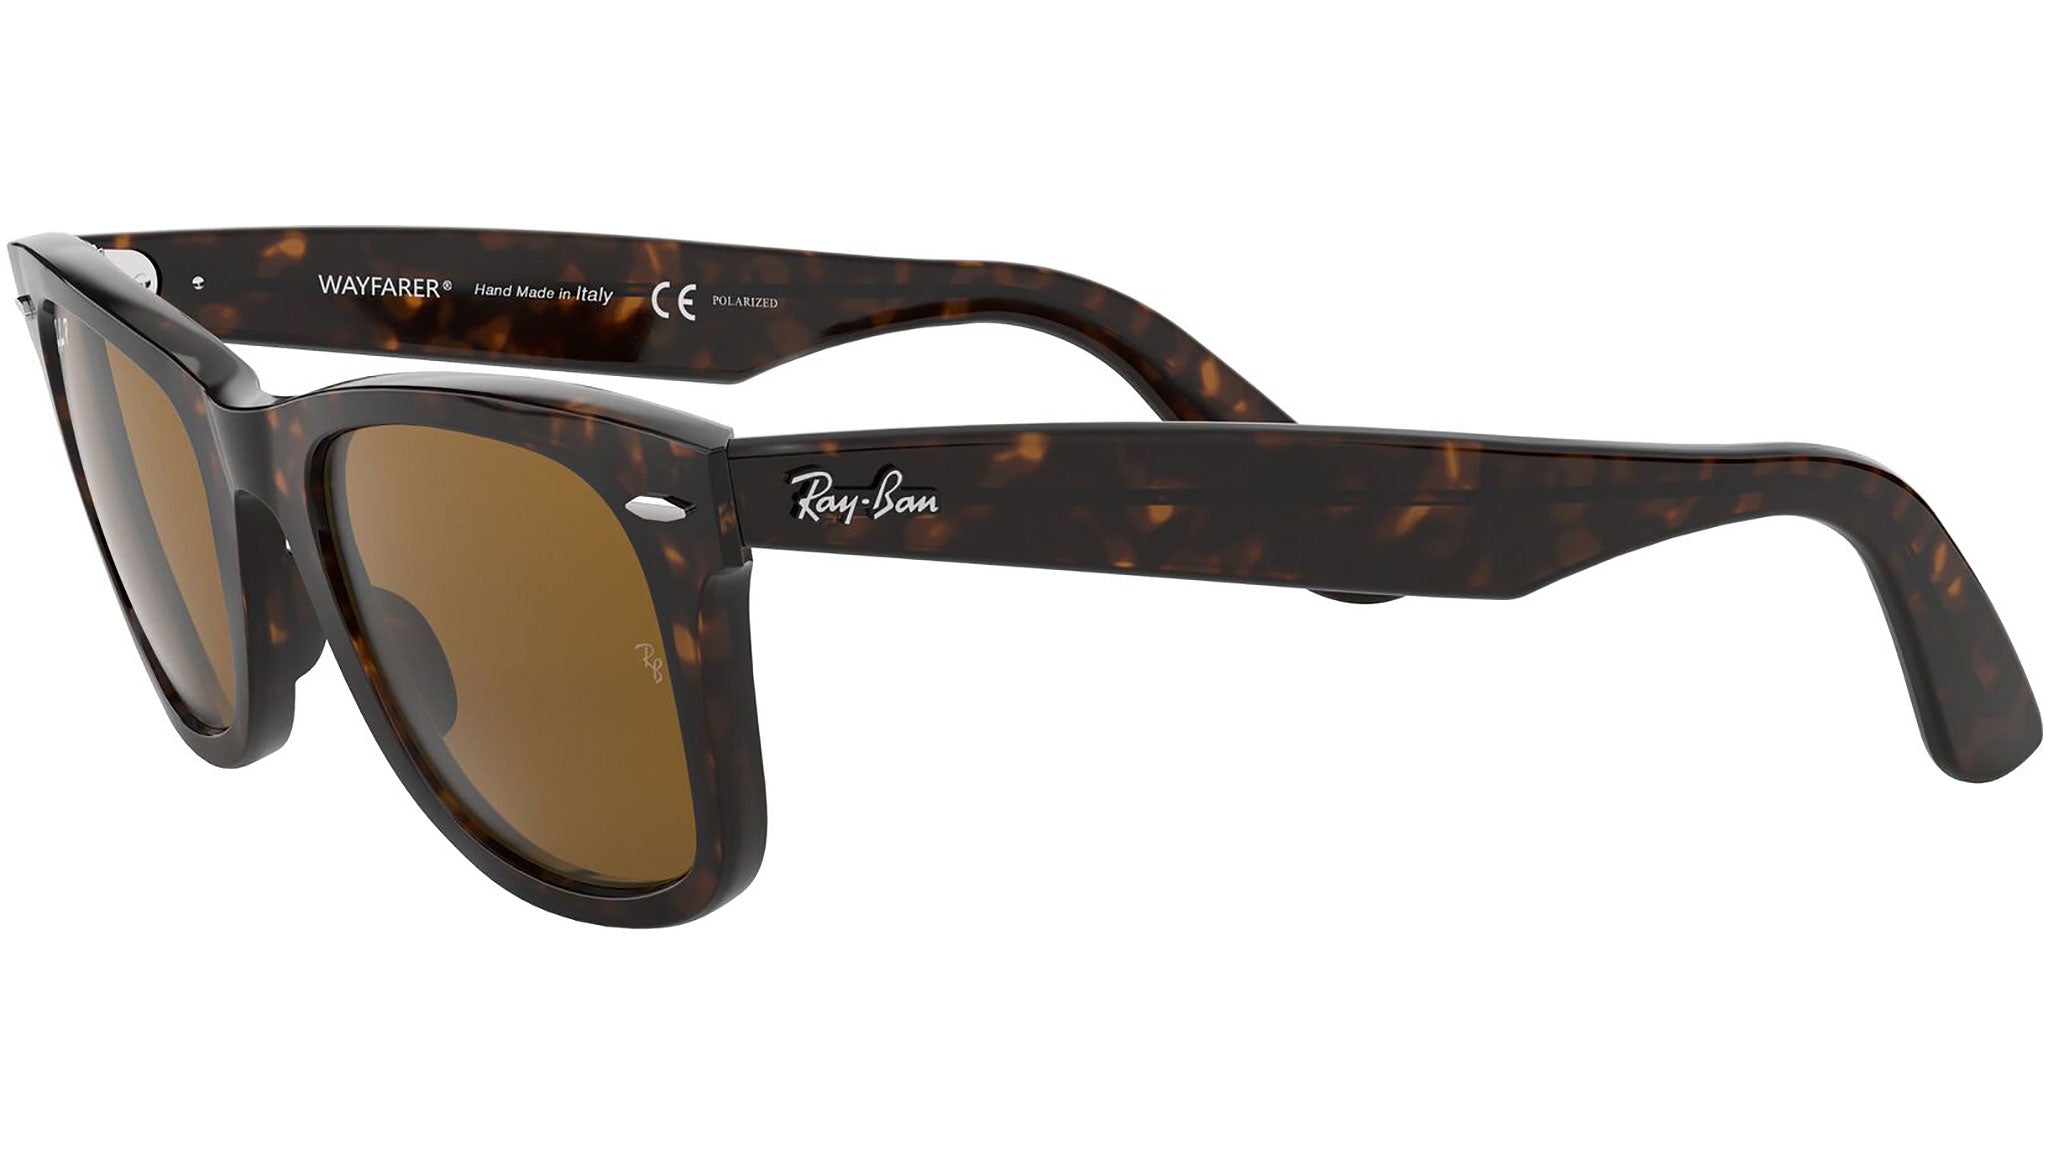 Pilot-loved Ray-Ban Sunglasses Are on Sale at Amazon